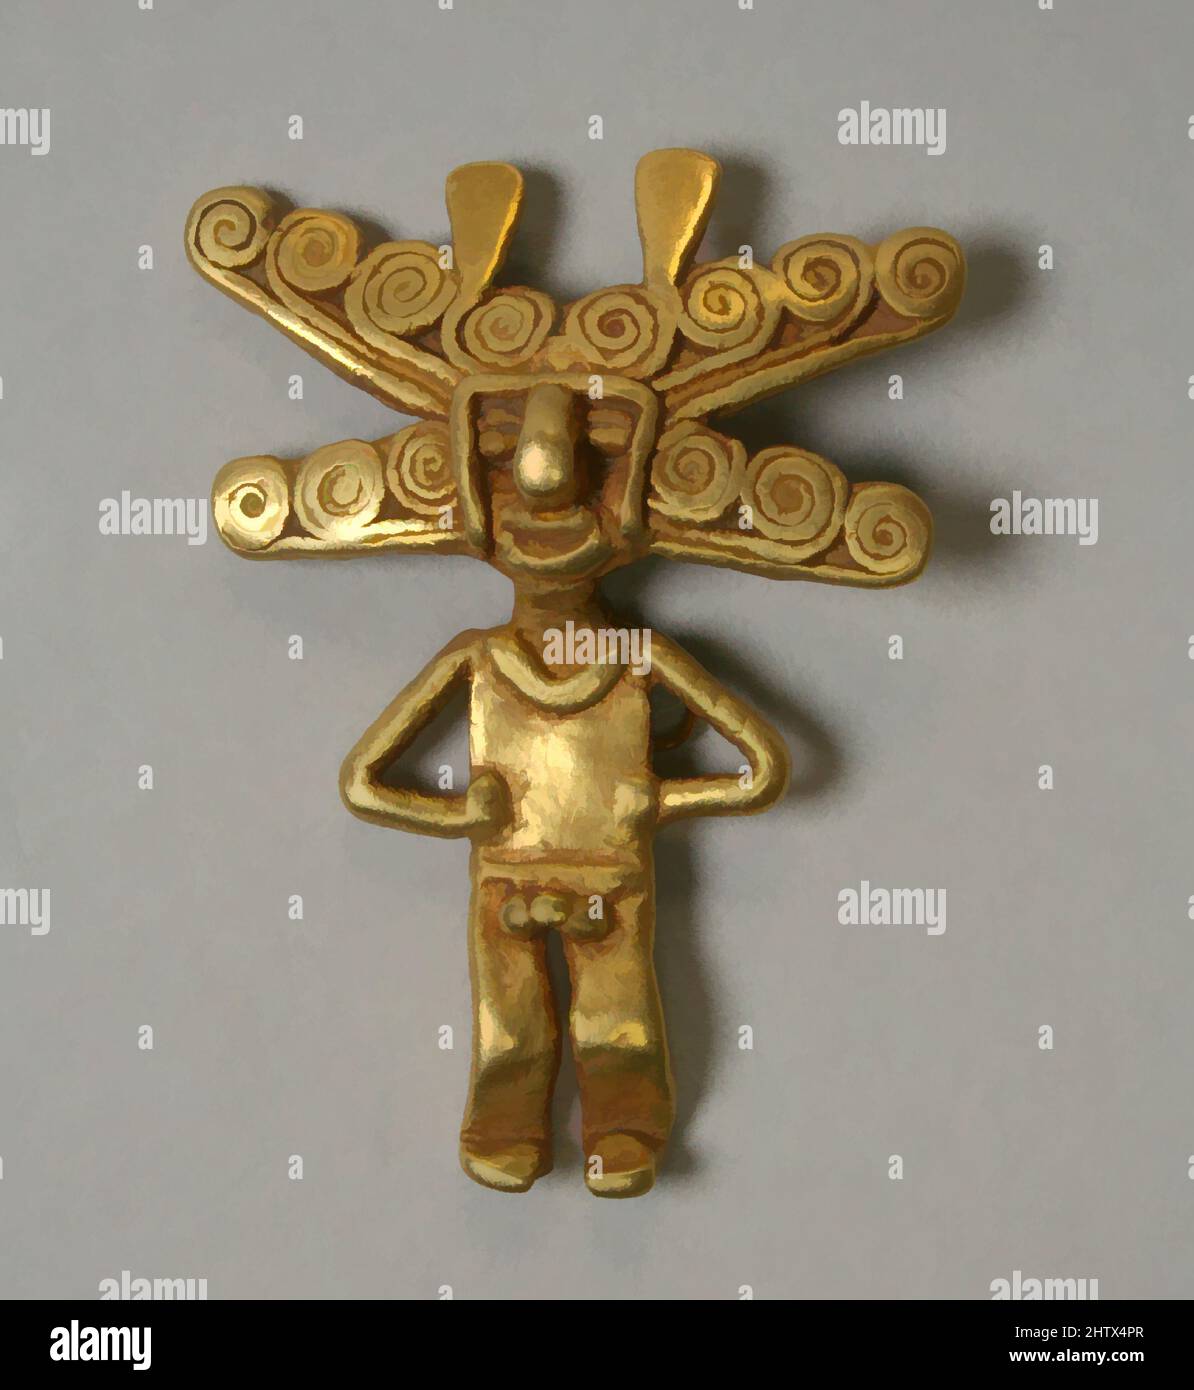 Art inspired by Gold Figure Pendant, 5th–10th century, Colombia, Quimbaya (?), Gold, H. 1 3/4 x W. 1 3/8 x D. 3/8 in. (4.4 x 3.5 x 1 cm), Metal-Ornaments, Classic works modernized by Artotop with a splash of modernity. Shapes, color and value, eye-catching visual impact on art. Emotions through freedom of artworks in a contemporary way. A timeless message pursuing a wildly creative new direction. Artists turning to the digital medium and creating the Artotop NFT Stock Photo